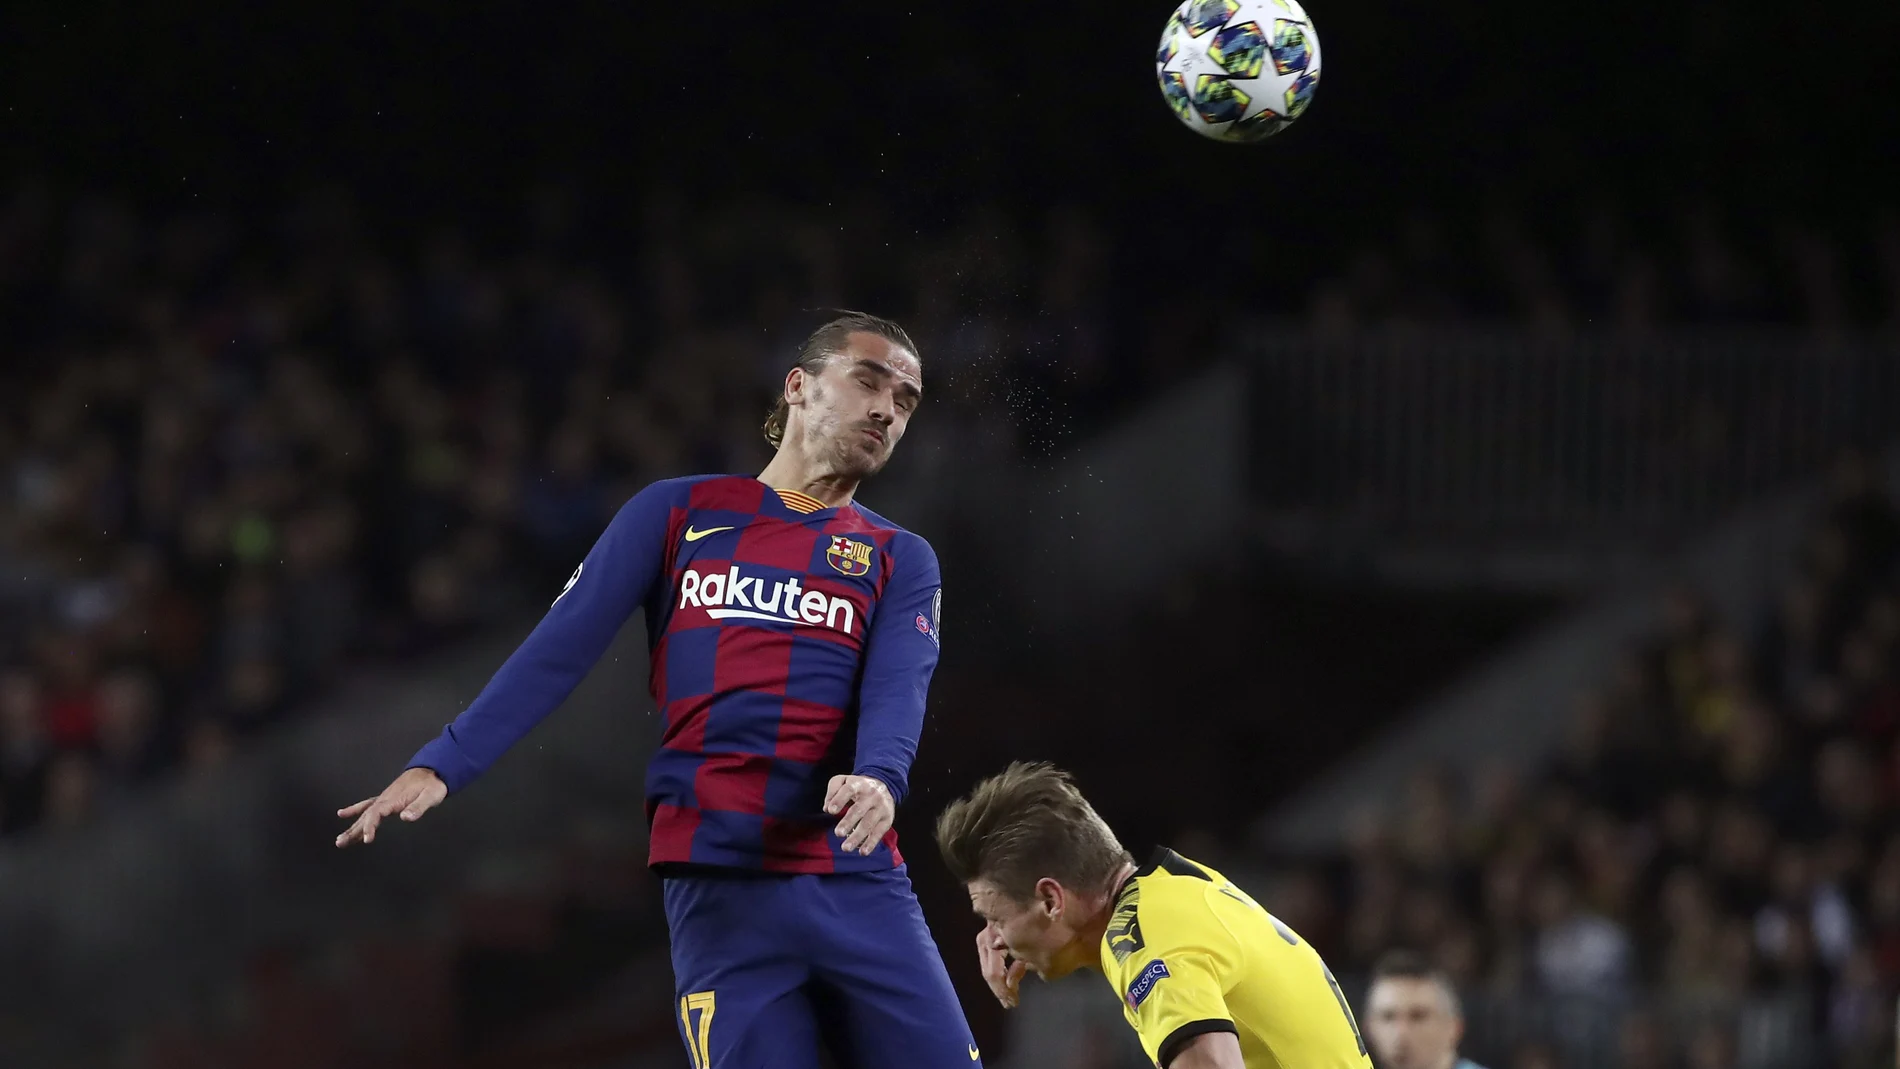 Barcelona's Antoine Griezmann heads the ball above Dortmund's Lukasz Piszczek, right, during a Champions League group F soccer match between Barcelona and Dortmund at the Camp Nou stadium in Barcelona, Spain, Wednesday, Nov. 27, 2019. (AP Photo/Emilio Morenatti)